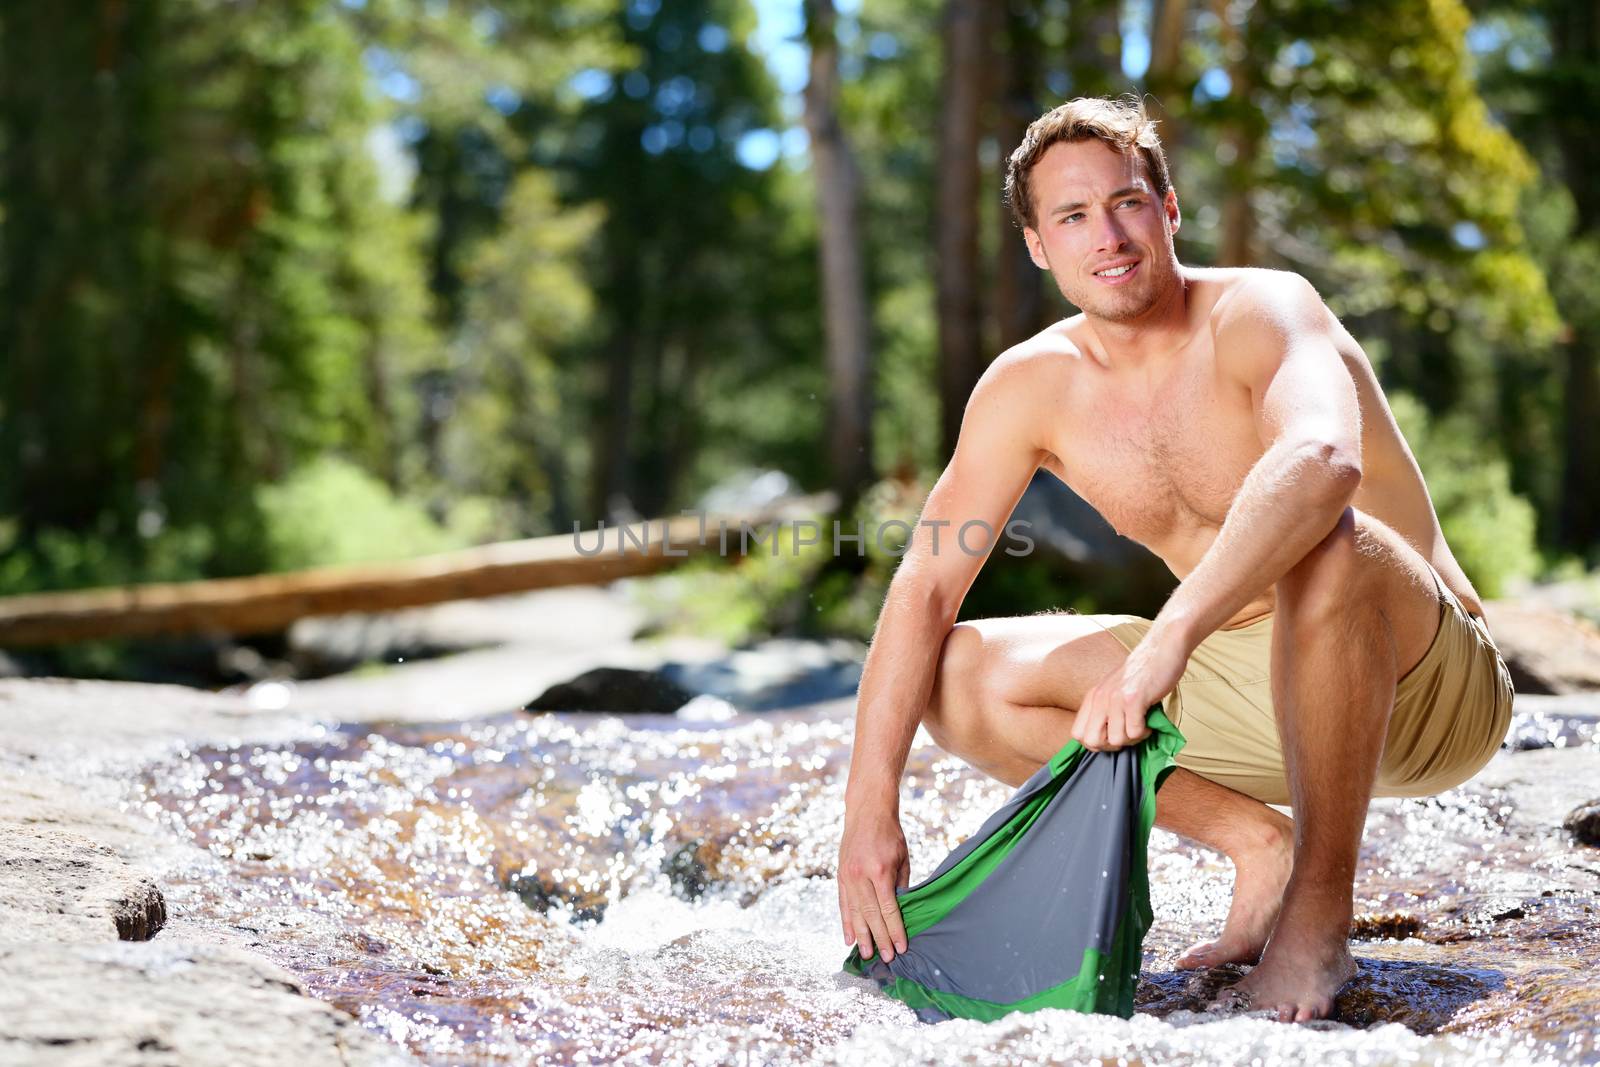 Camping hiker man washing clothes on trek in nature river. Hiking young male adult doing clothing wash chores in natural stream of water during an adventure trip outdoor.